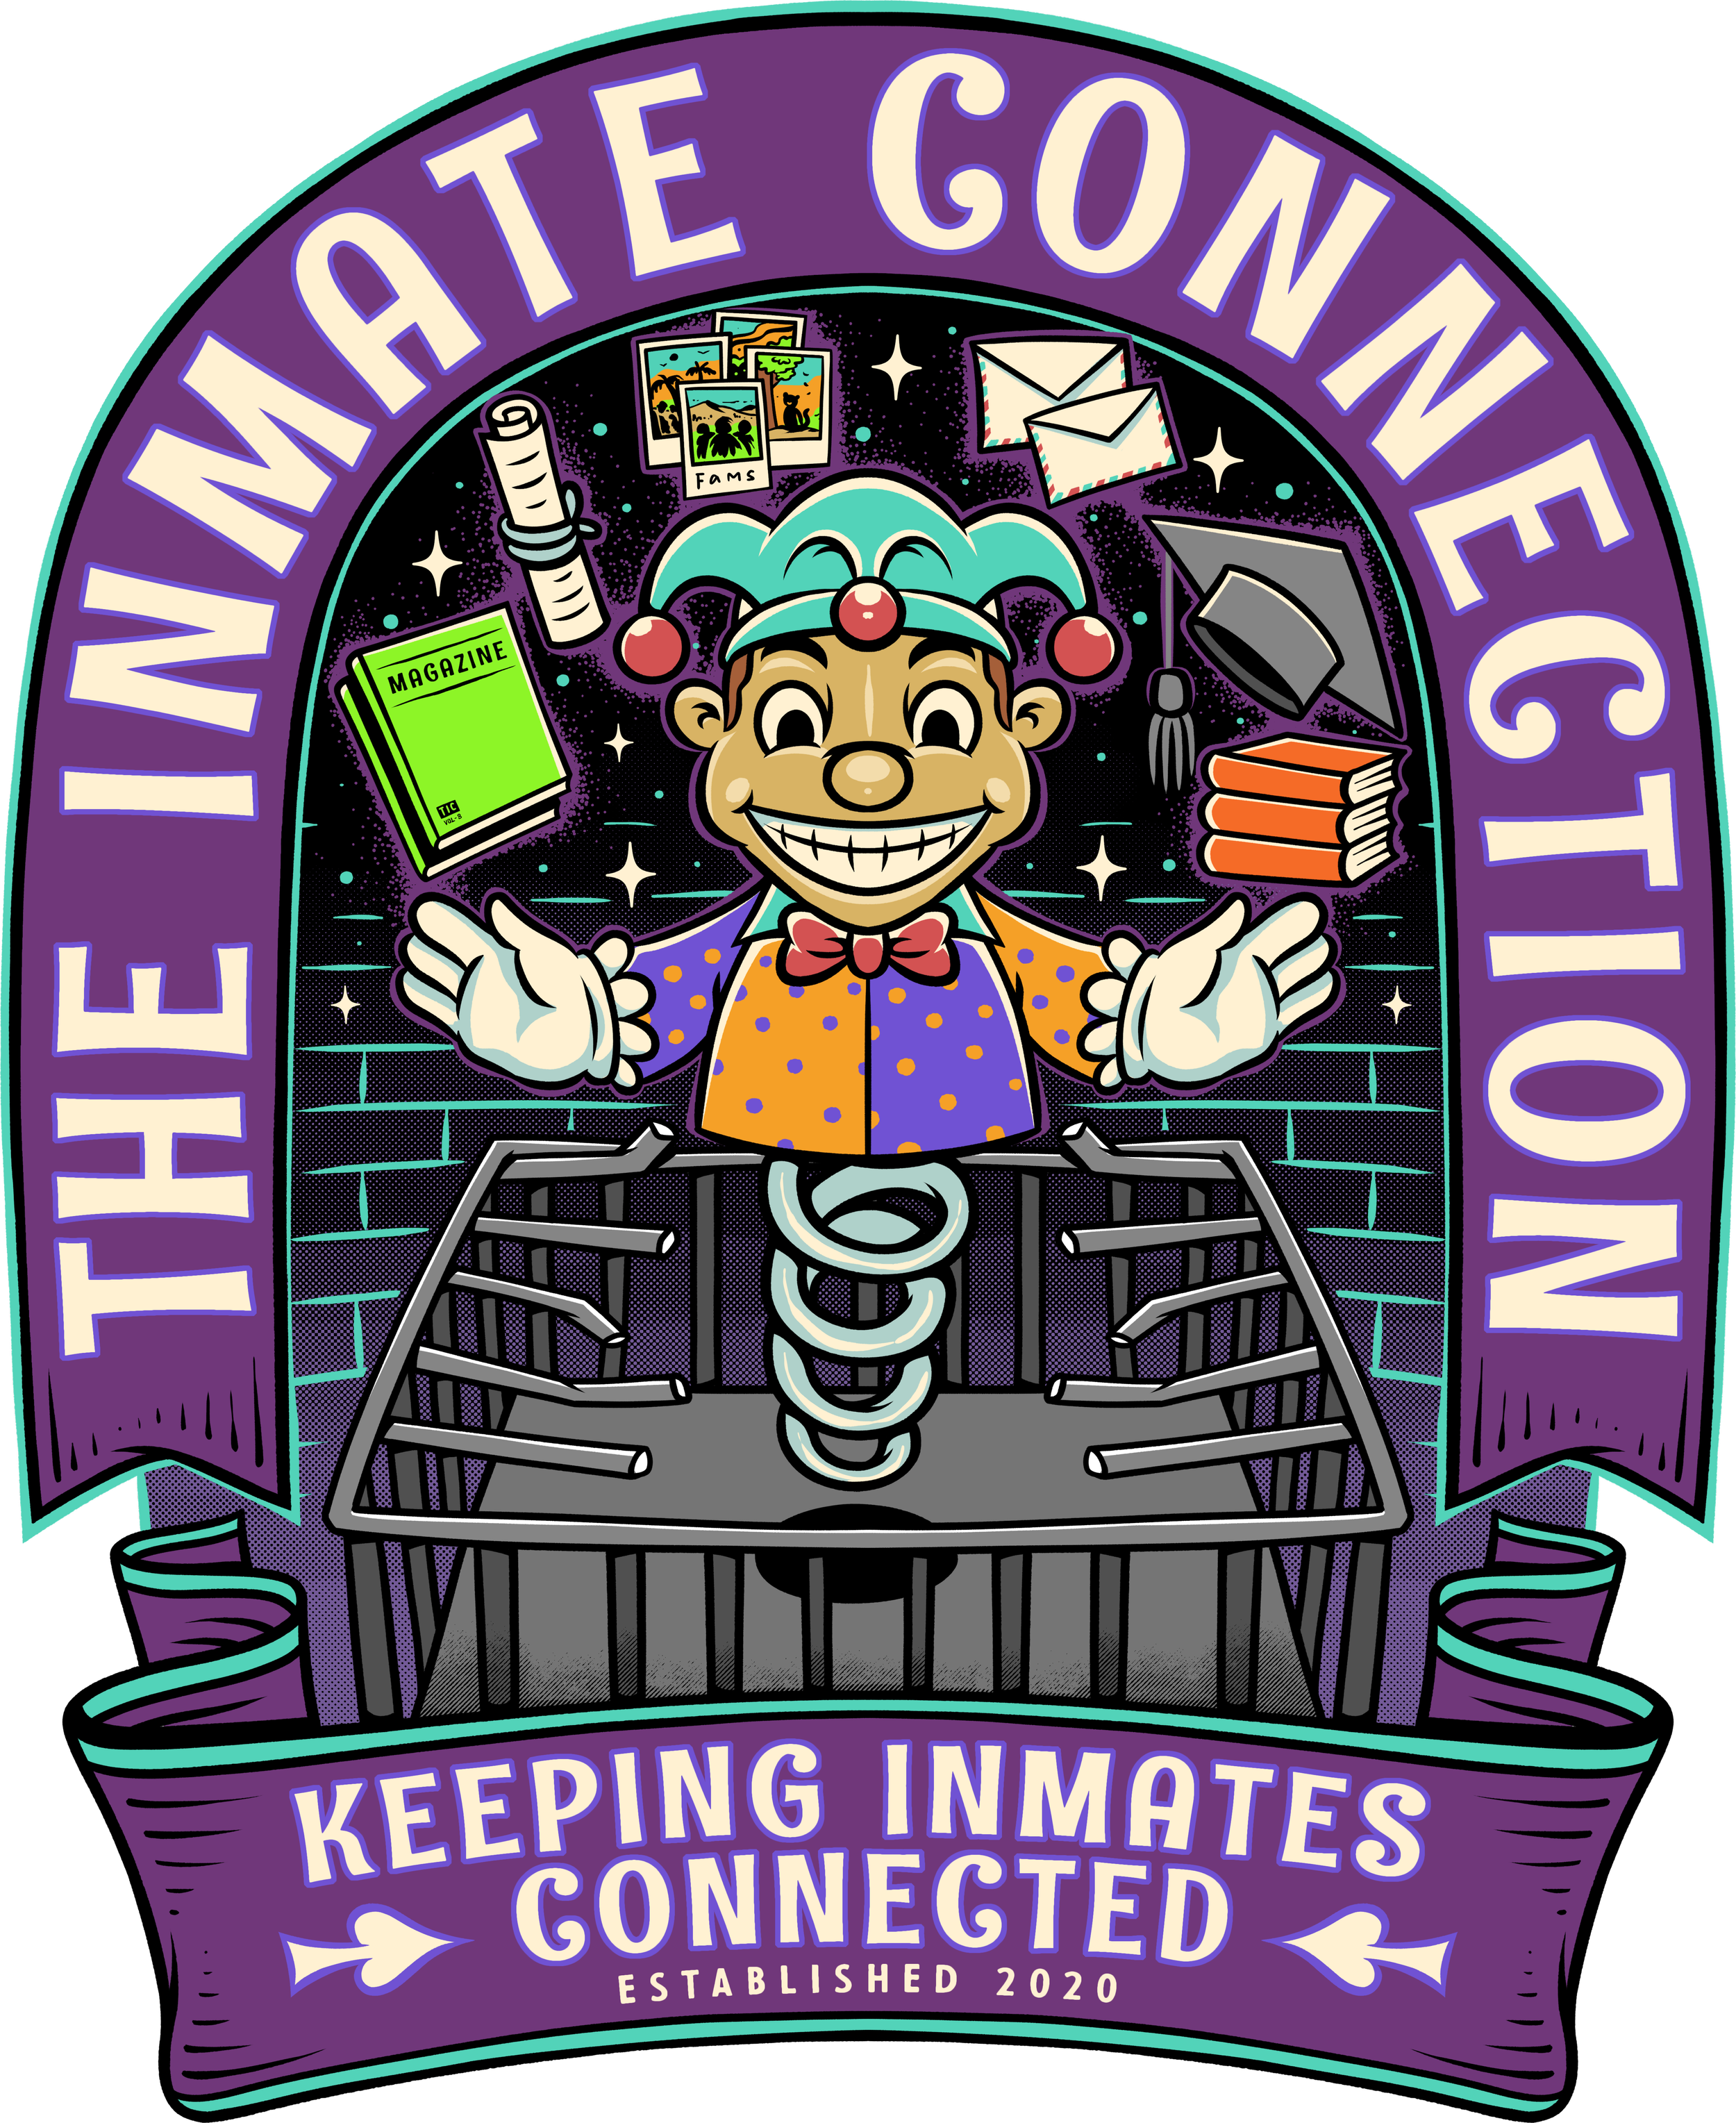 The Inmate Connection